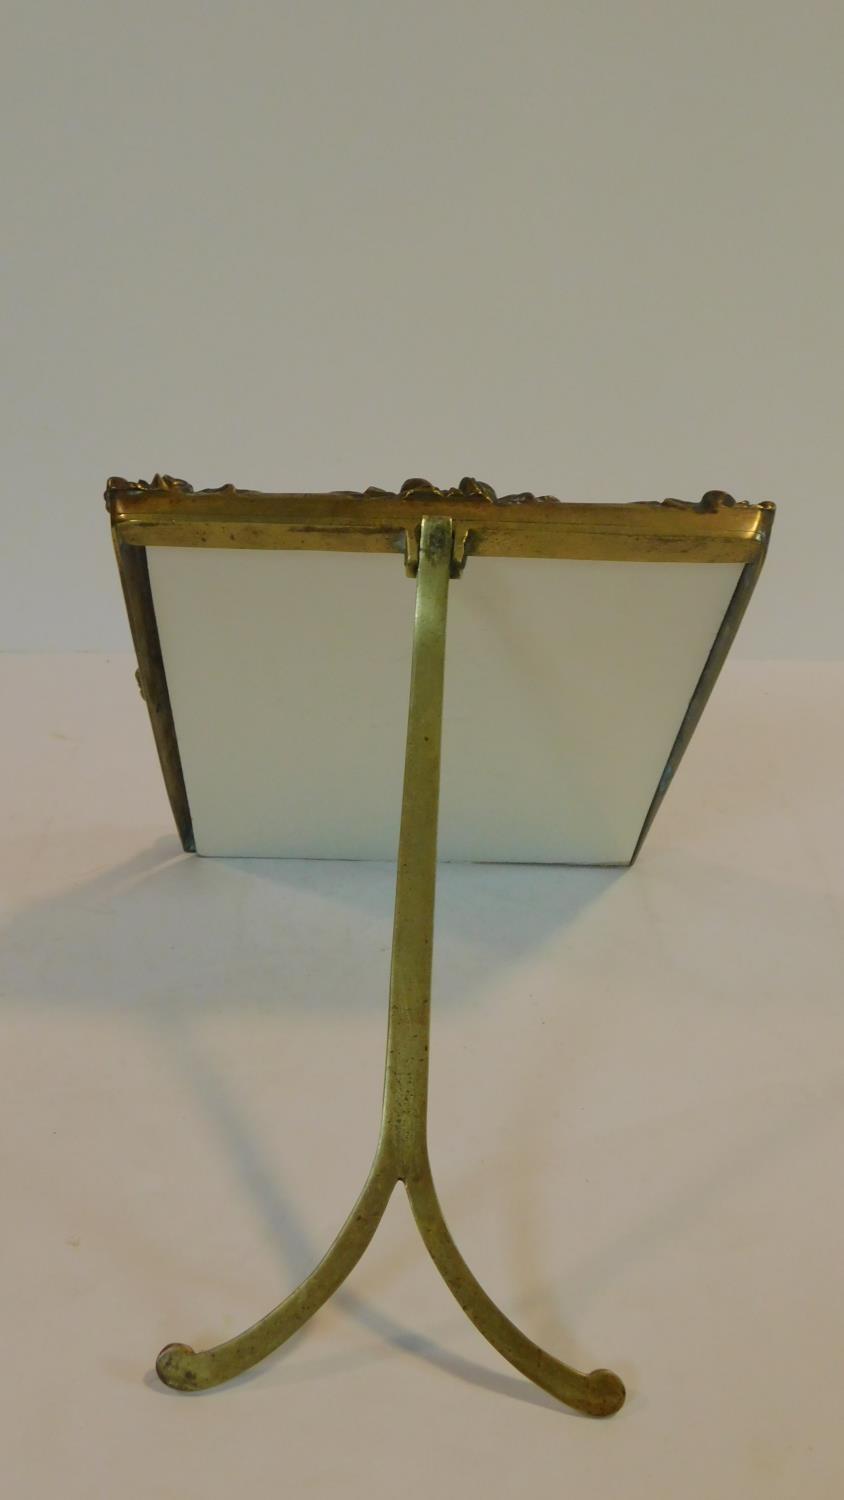 An antique brass relief moulded easel photo frame with roses and foliage and Y shaped brass hinged - Image 3 of 3